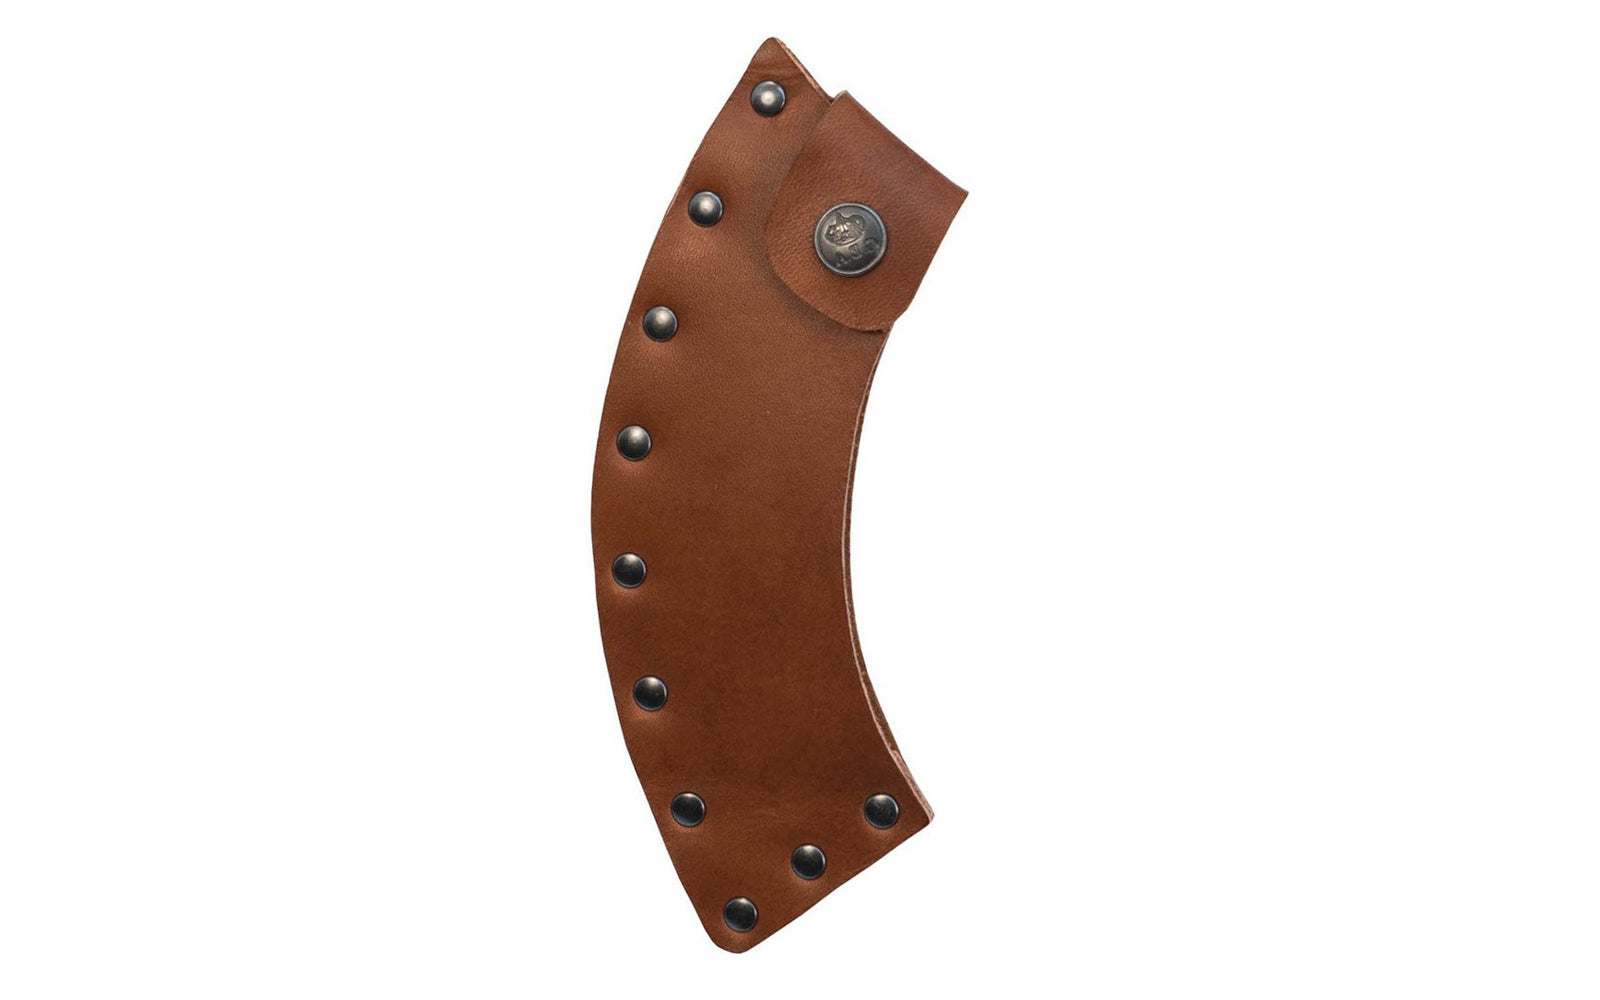 Gränsfors Bruk grain leather sheath is designed for the Gränsfors Bruk Broad Axes. The vegetable-tanned leather is free from heavy metals & is biodegradable. 7391765430083. Model 480C